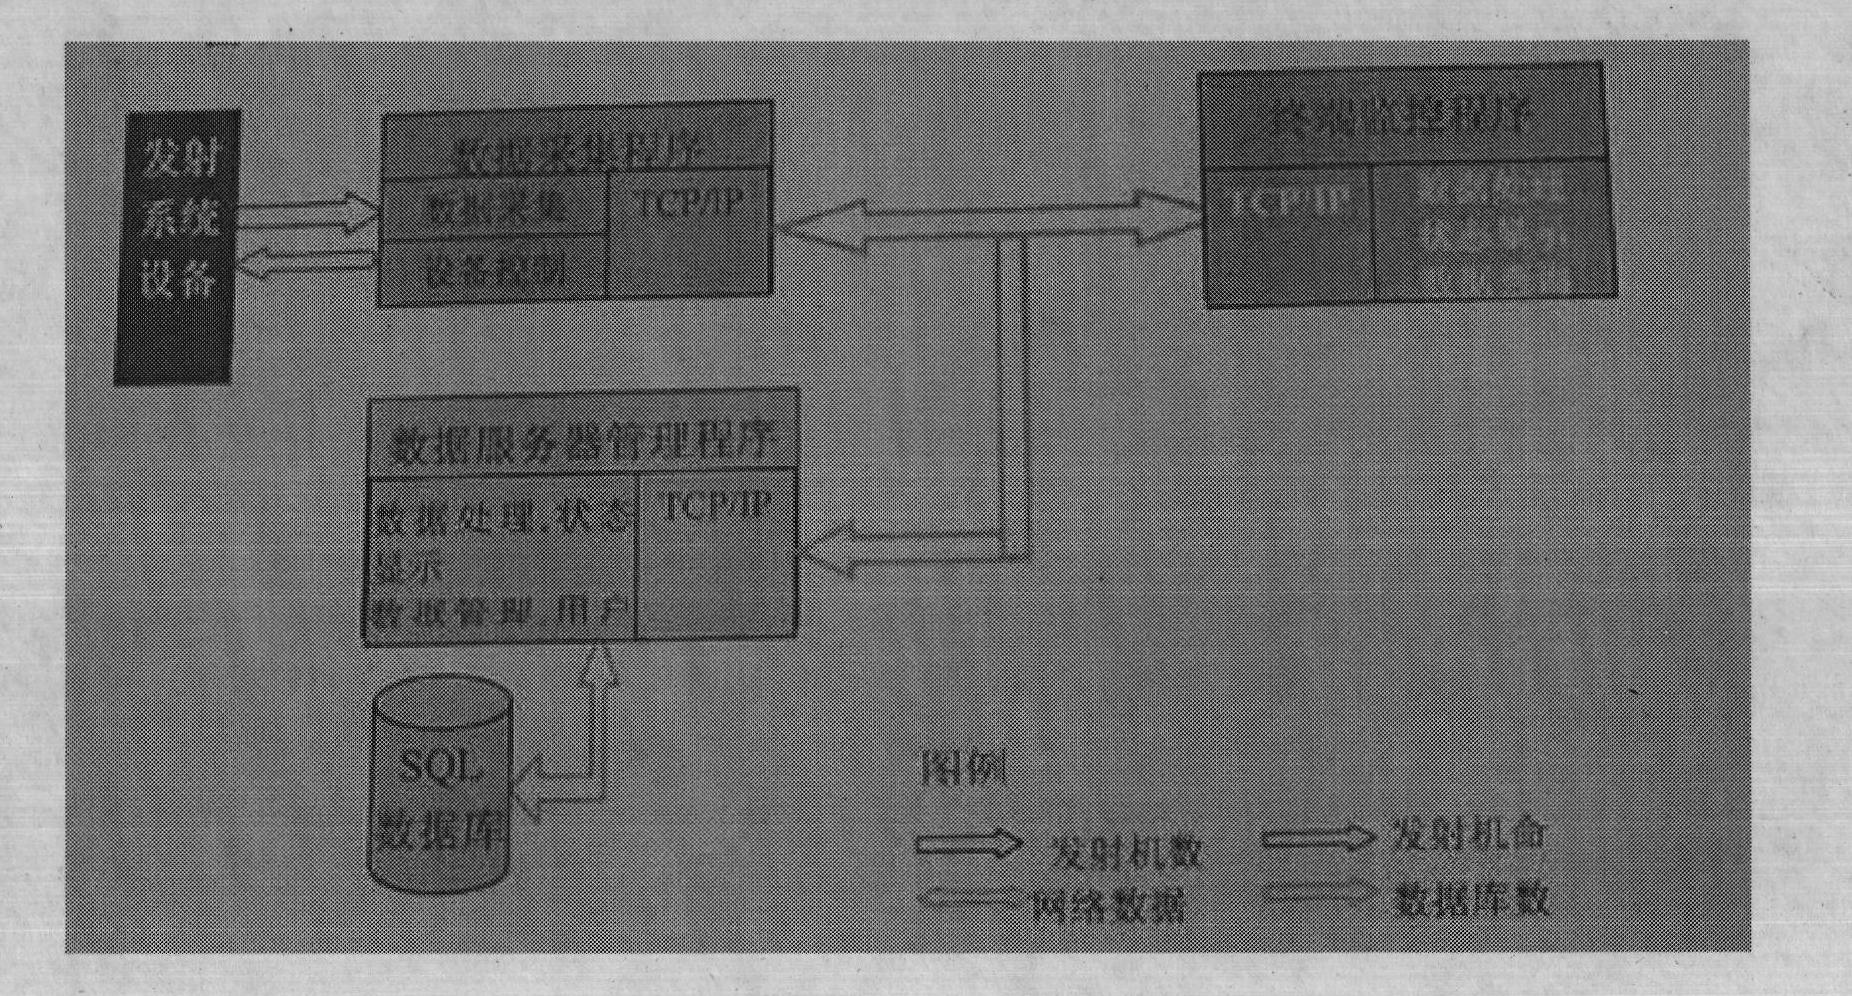 Quick-response N+1 television emission system